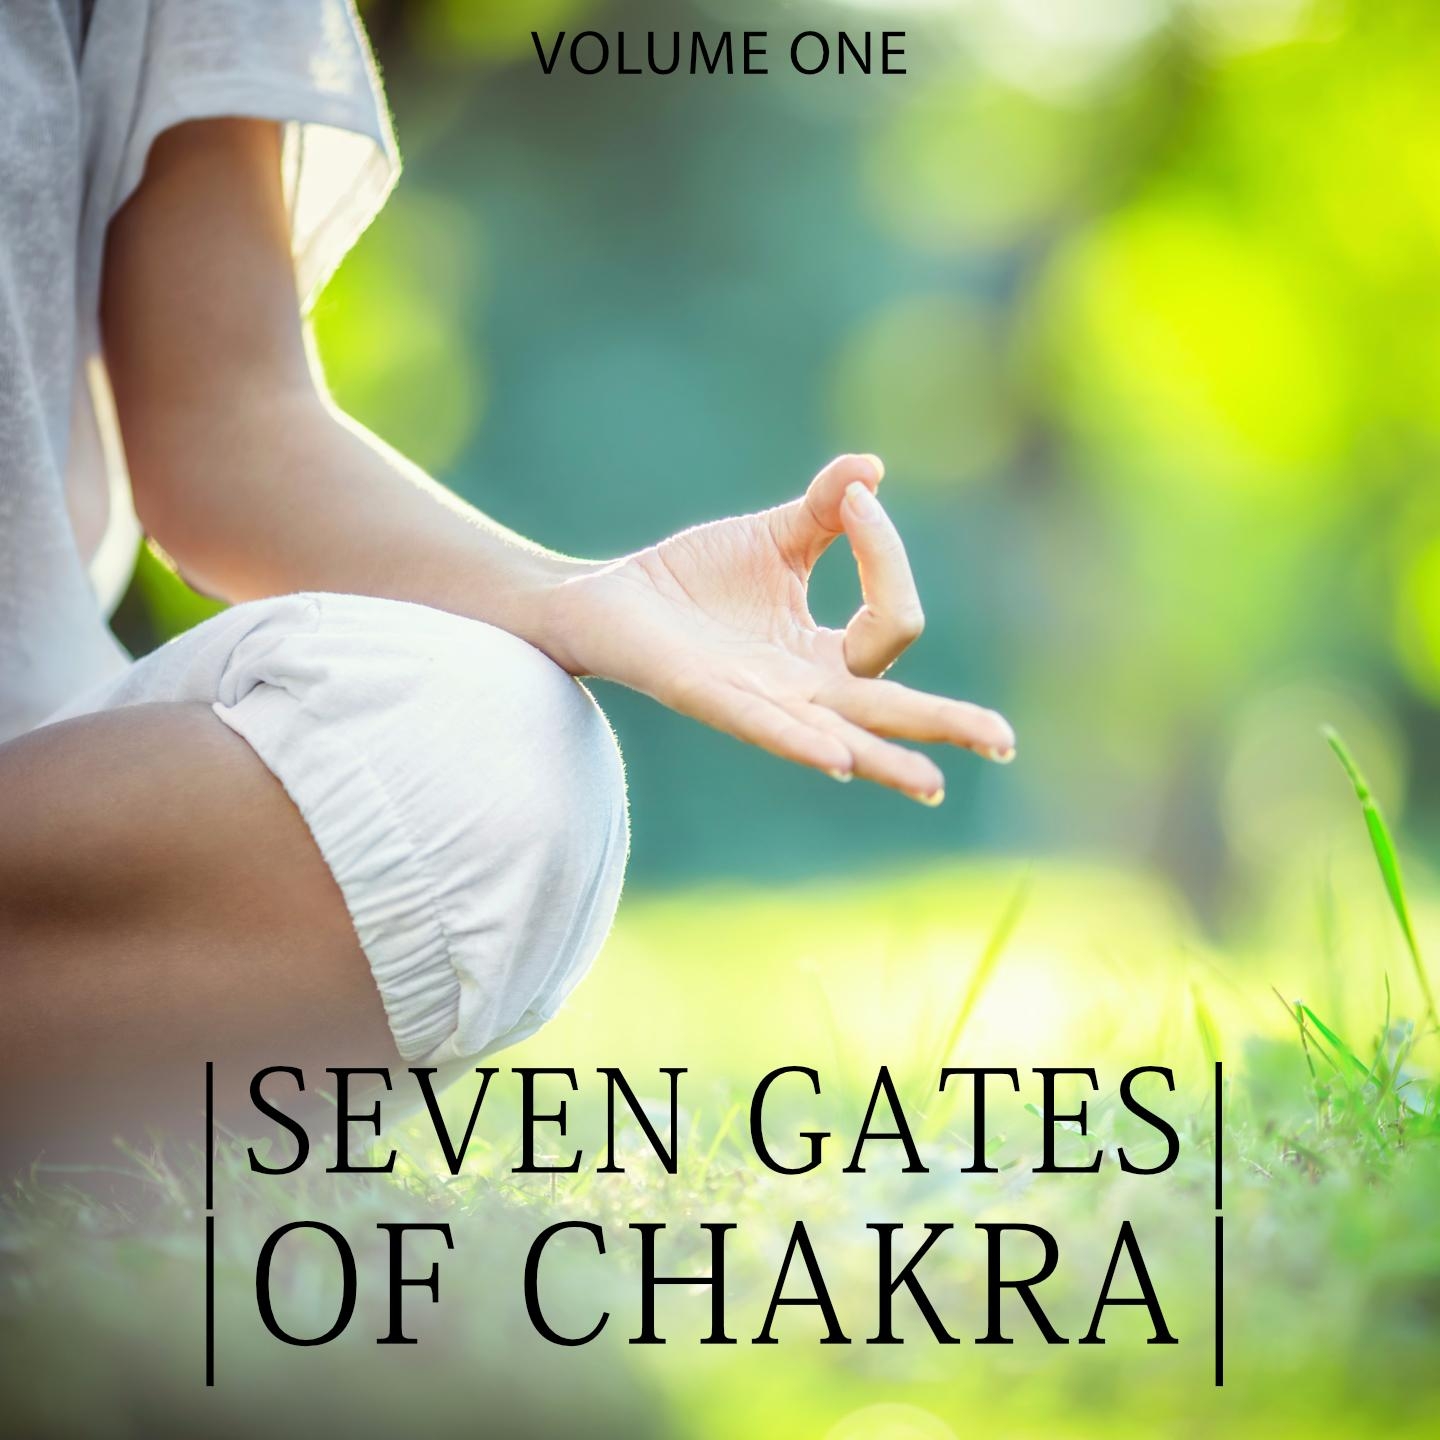 Seven Gates Of Chakra, Vol. 1 (Best of Background Music For Yoga, Relaxation & Spa)